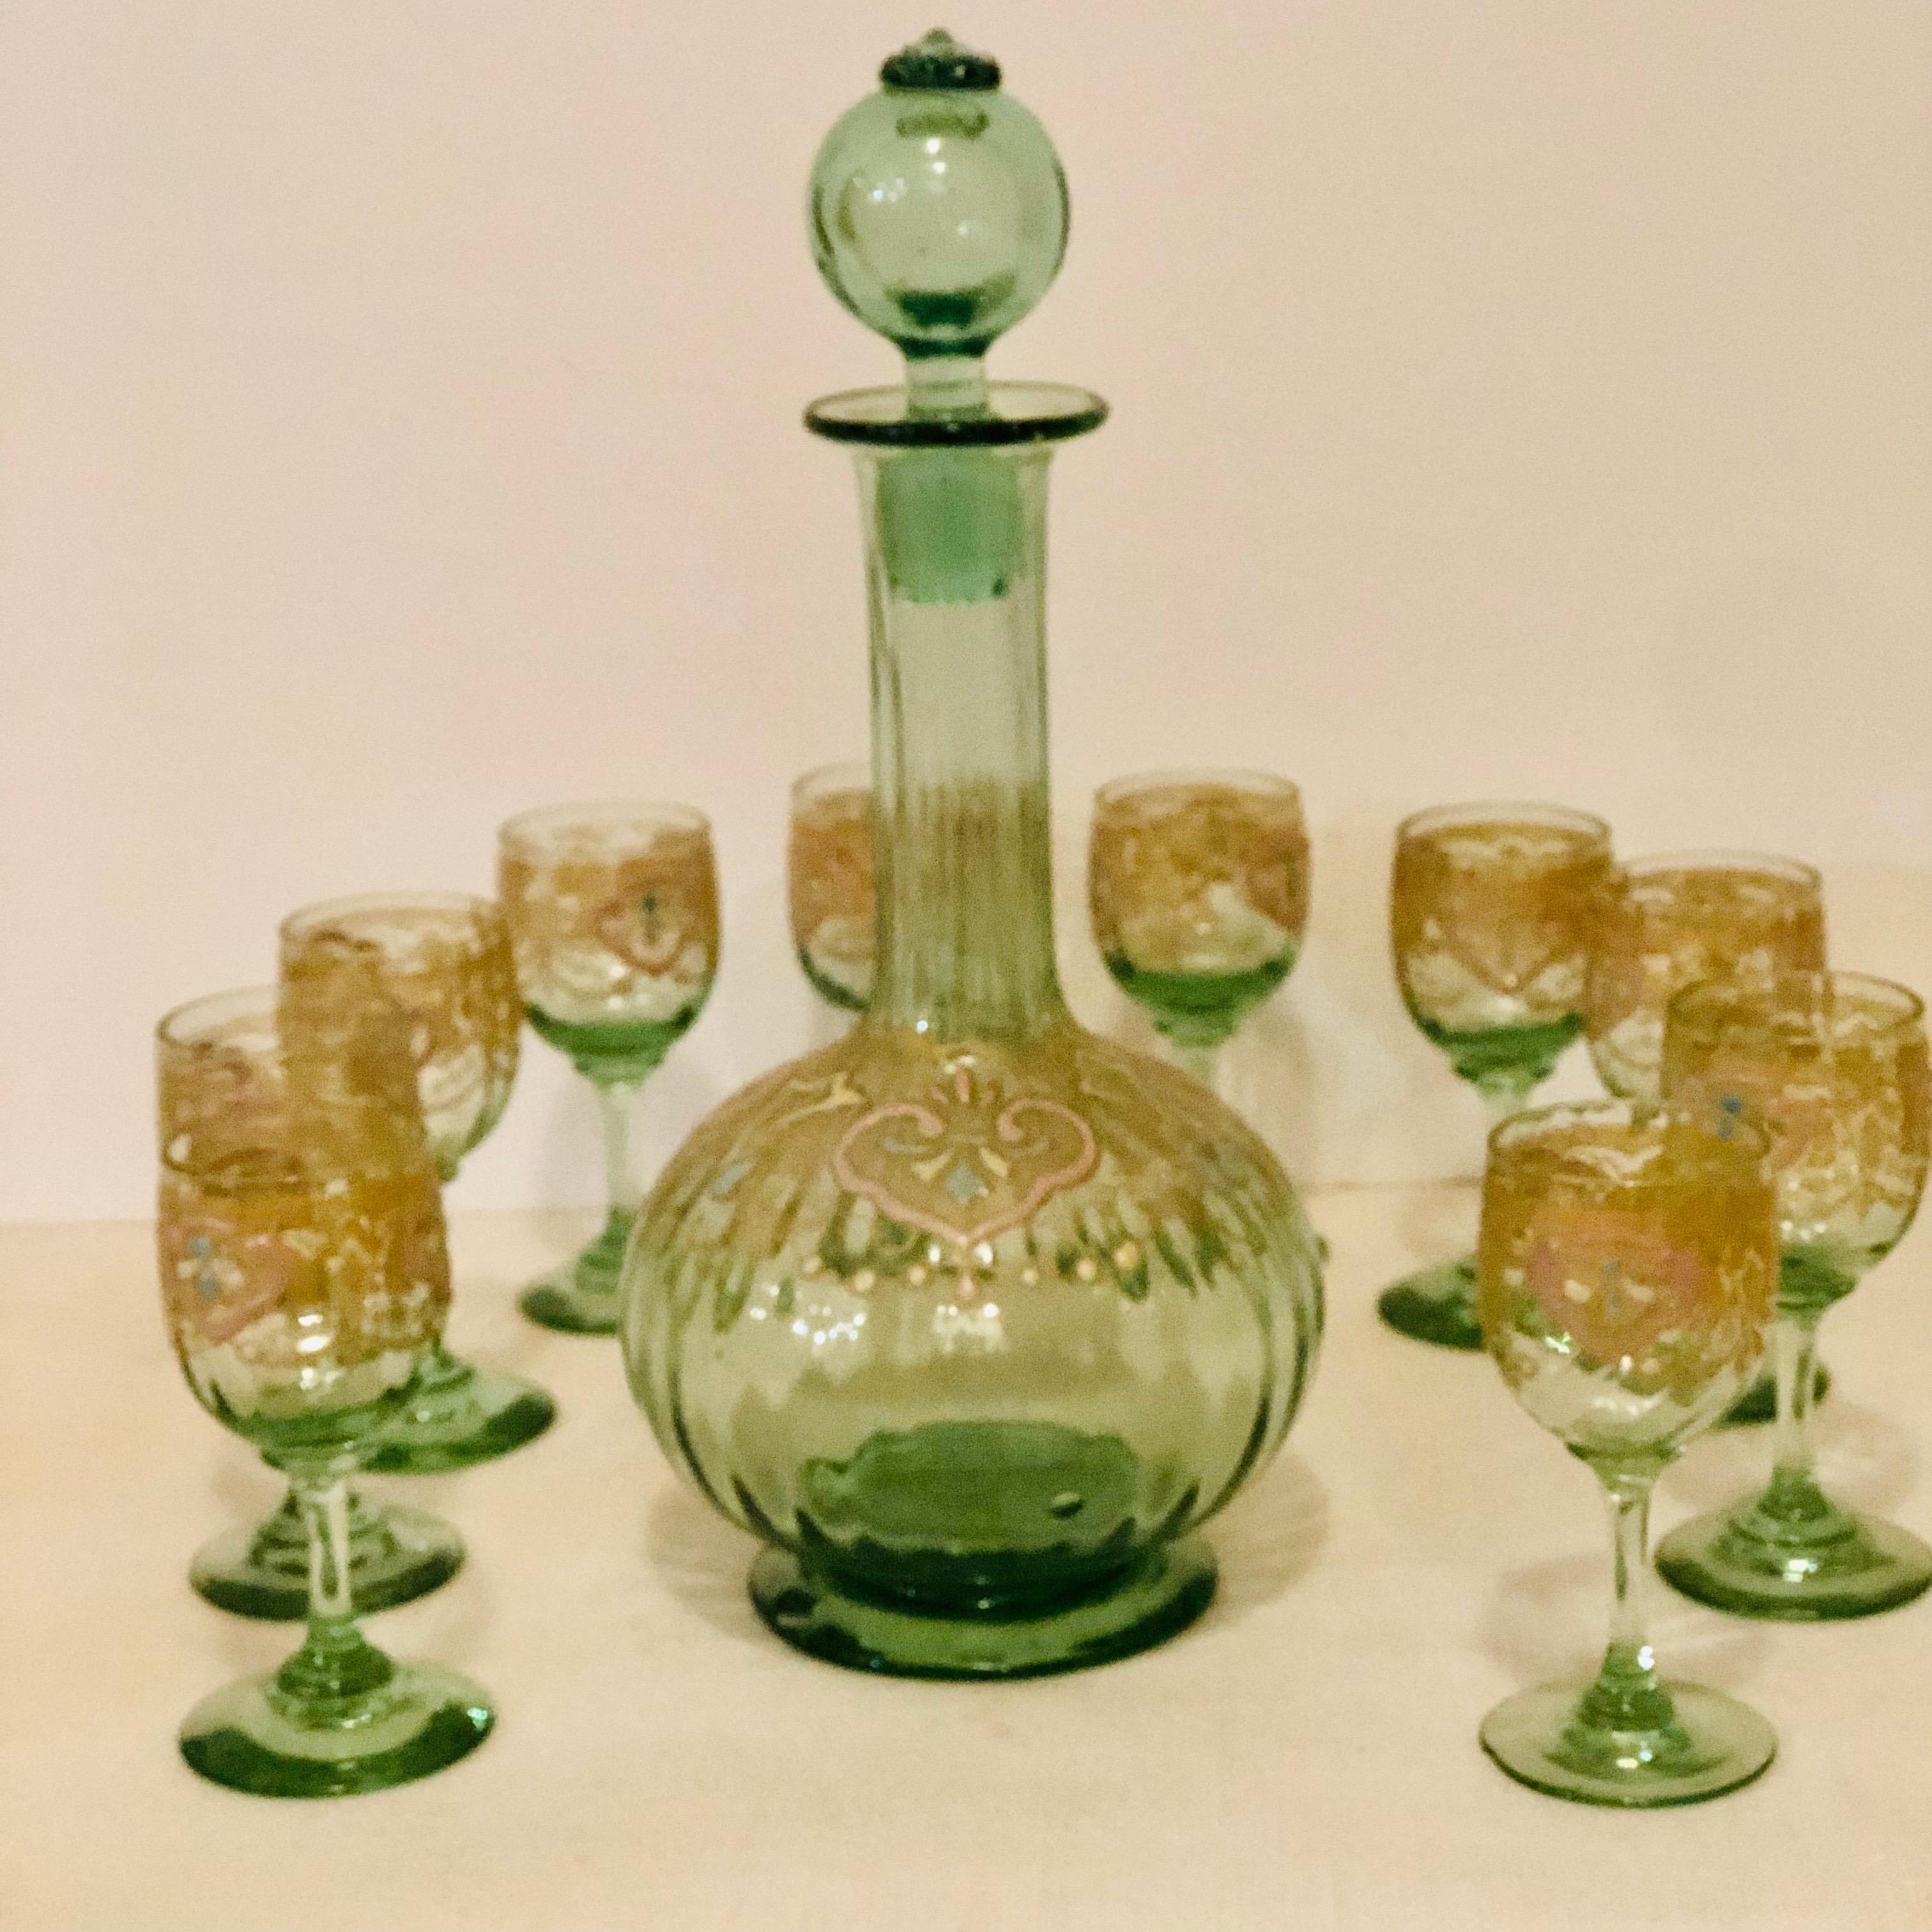 Early 20th Century Venetian Decanter With Ten Venetian Cordial Glasses With Colorful Enamel Accents